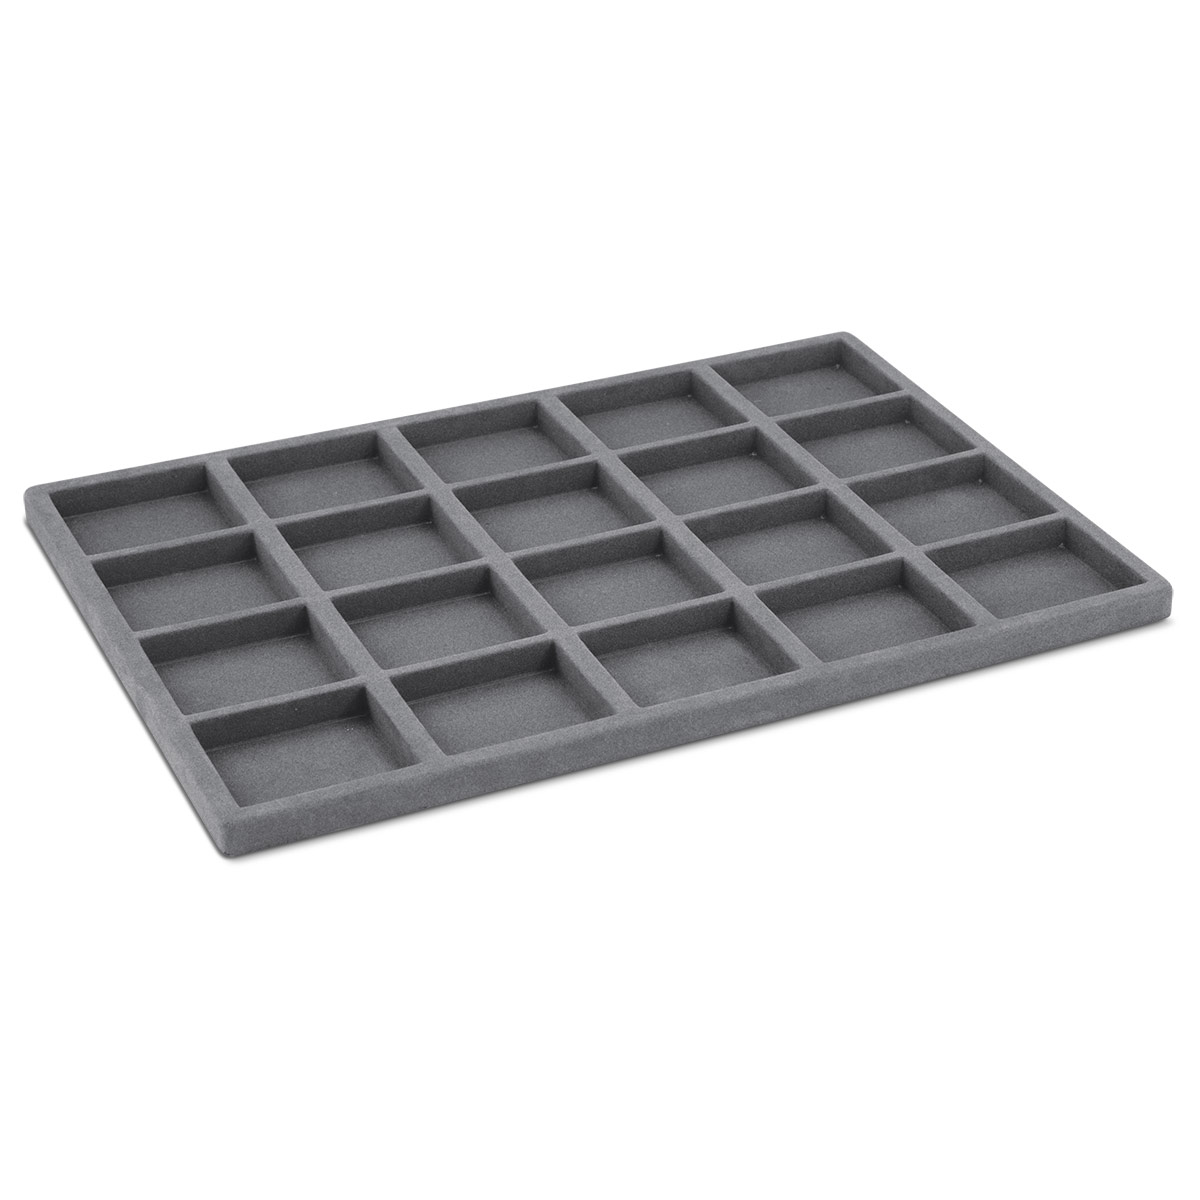 Inlay with 15 compartments, 65 x 75 mm, for tray N° 069002